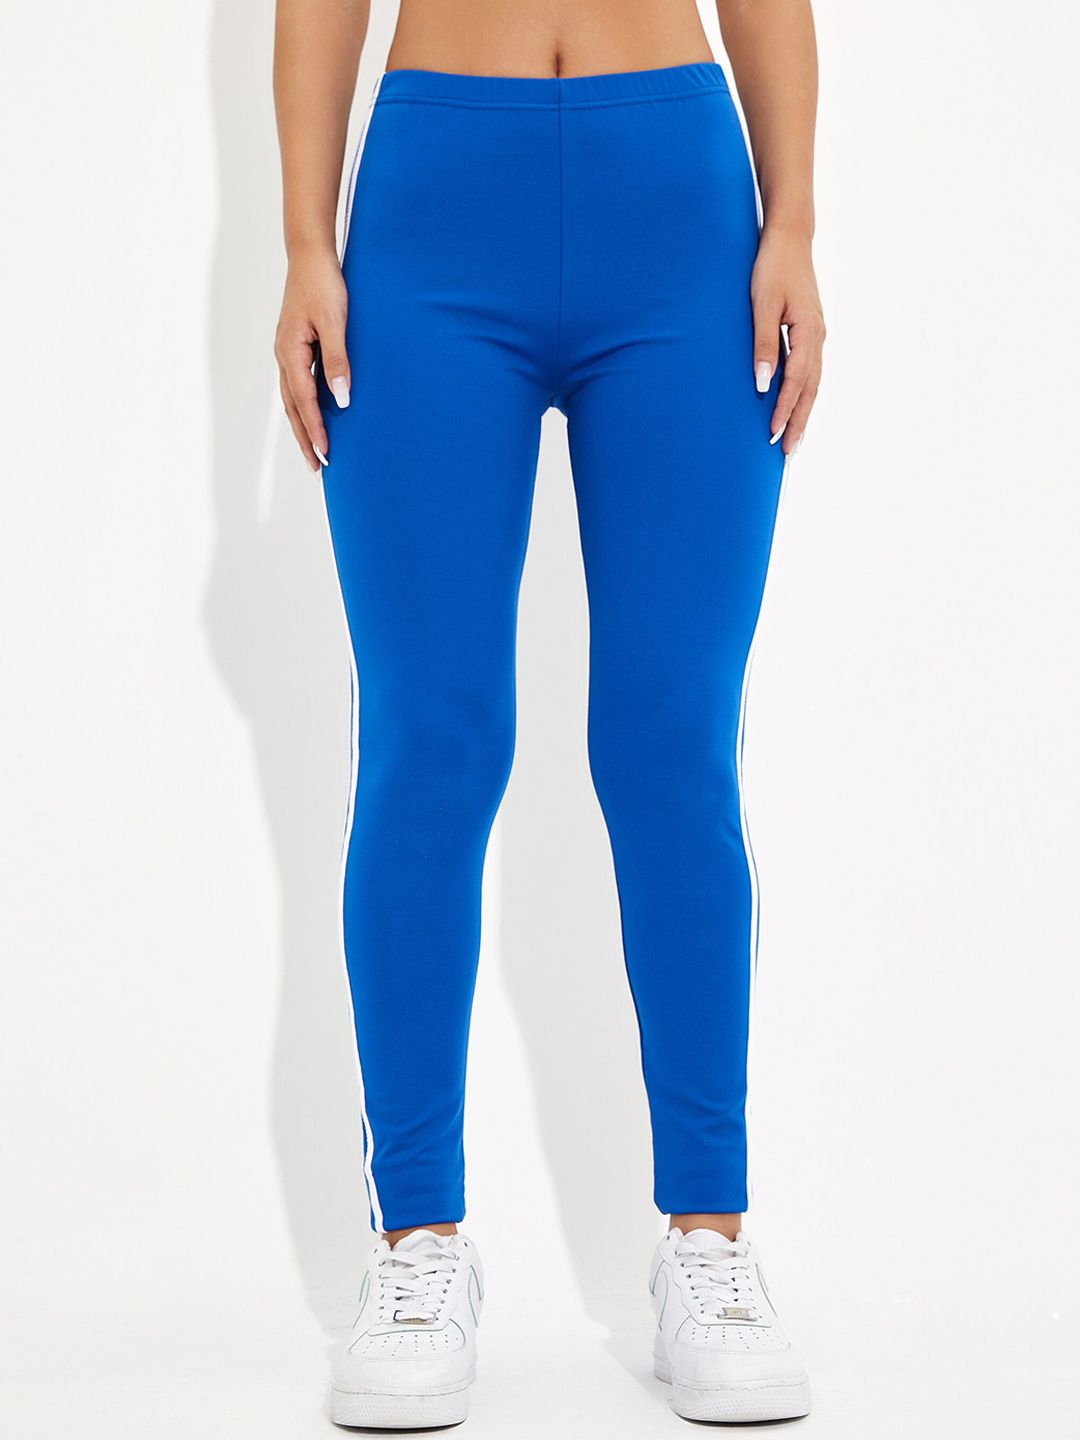 URBANIC Women Blue Solid Gym Tights Price in India